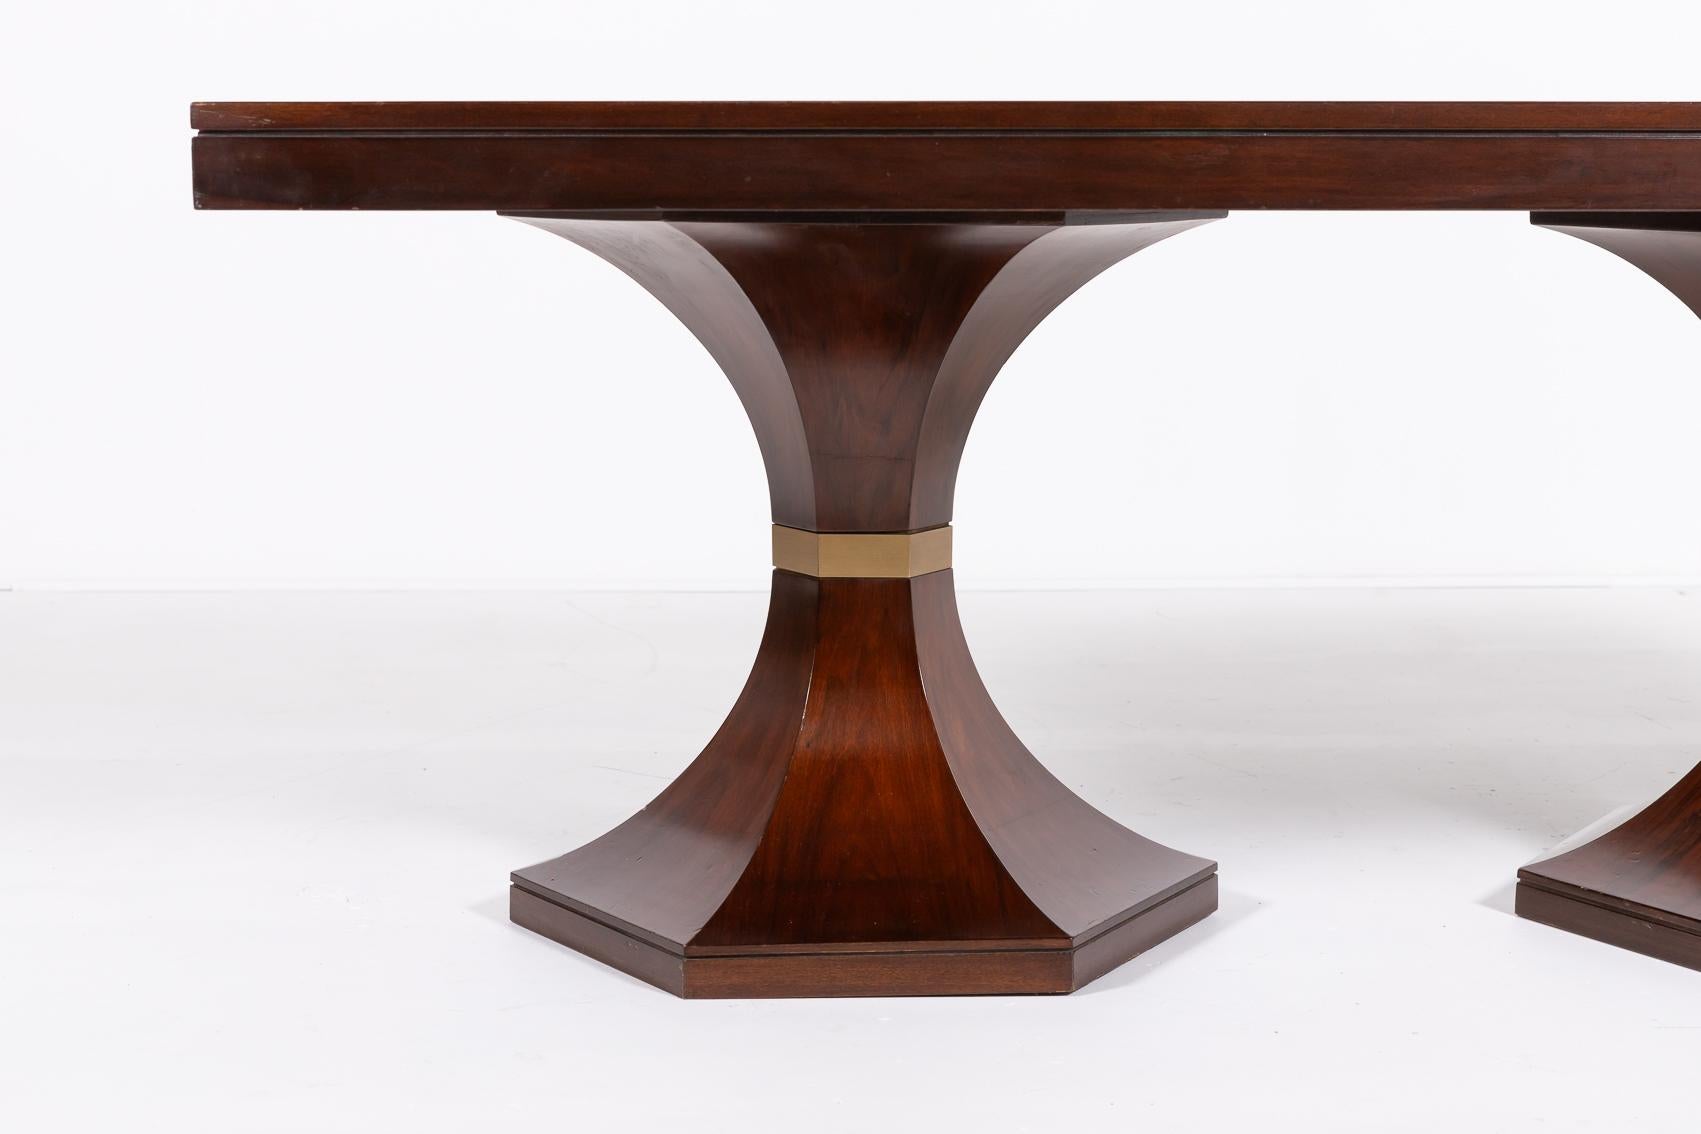 Italian Mid-Century Modern rectangular table from Carlo de Carli, 1960’s. It has a lacquered walnut finish with brass decor elements in the middle of the legs.

Condition
Good, usage marks

Dimensions
depth: 100 cm
width: 198,5 cm
height: 76 cm